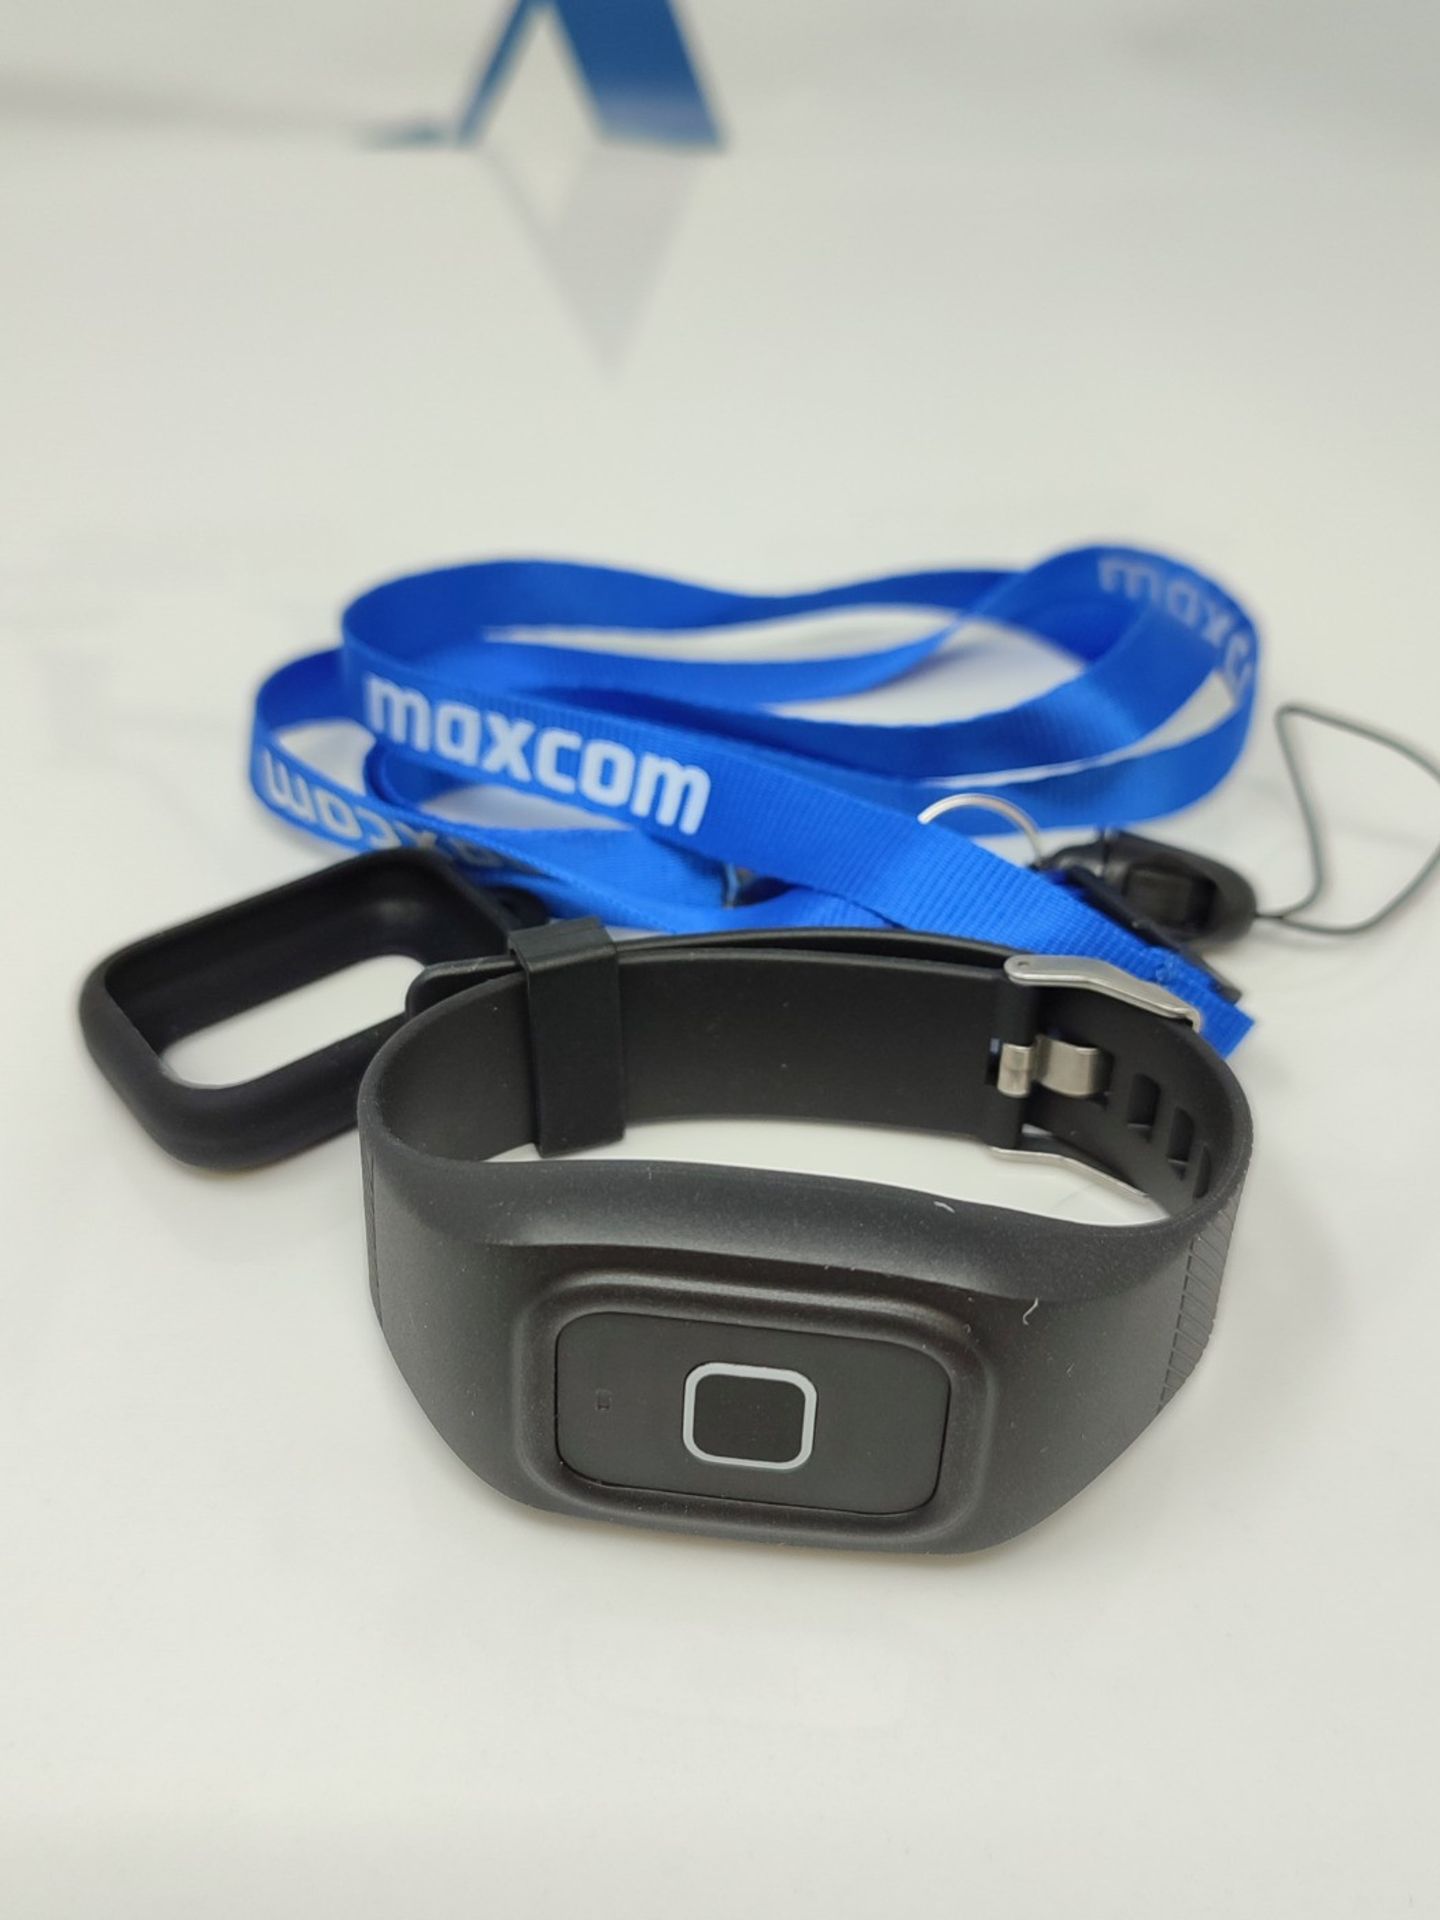 Maxcom FW735 - Emergency bracelet for older people, adults, with SOS emergency button, - Image 2 of 2